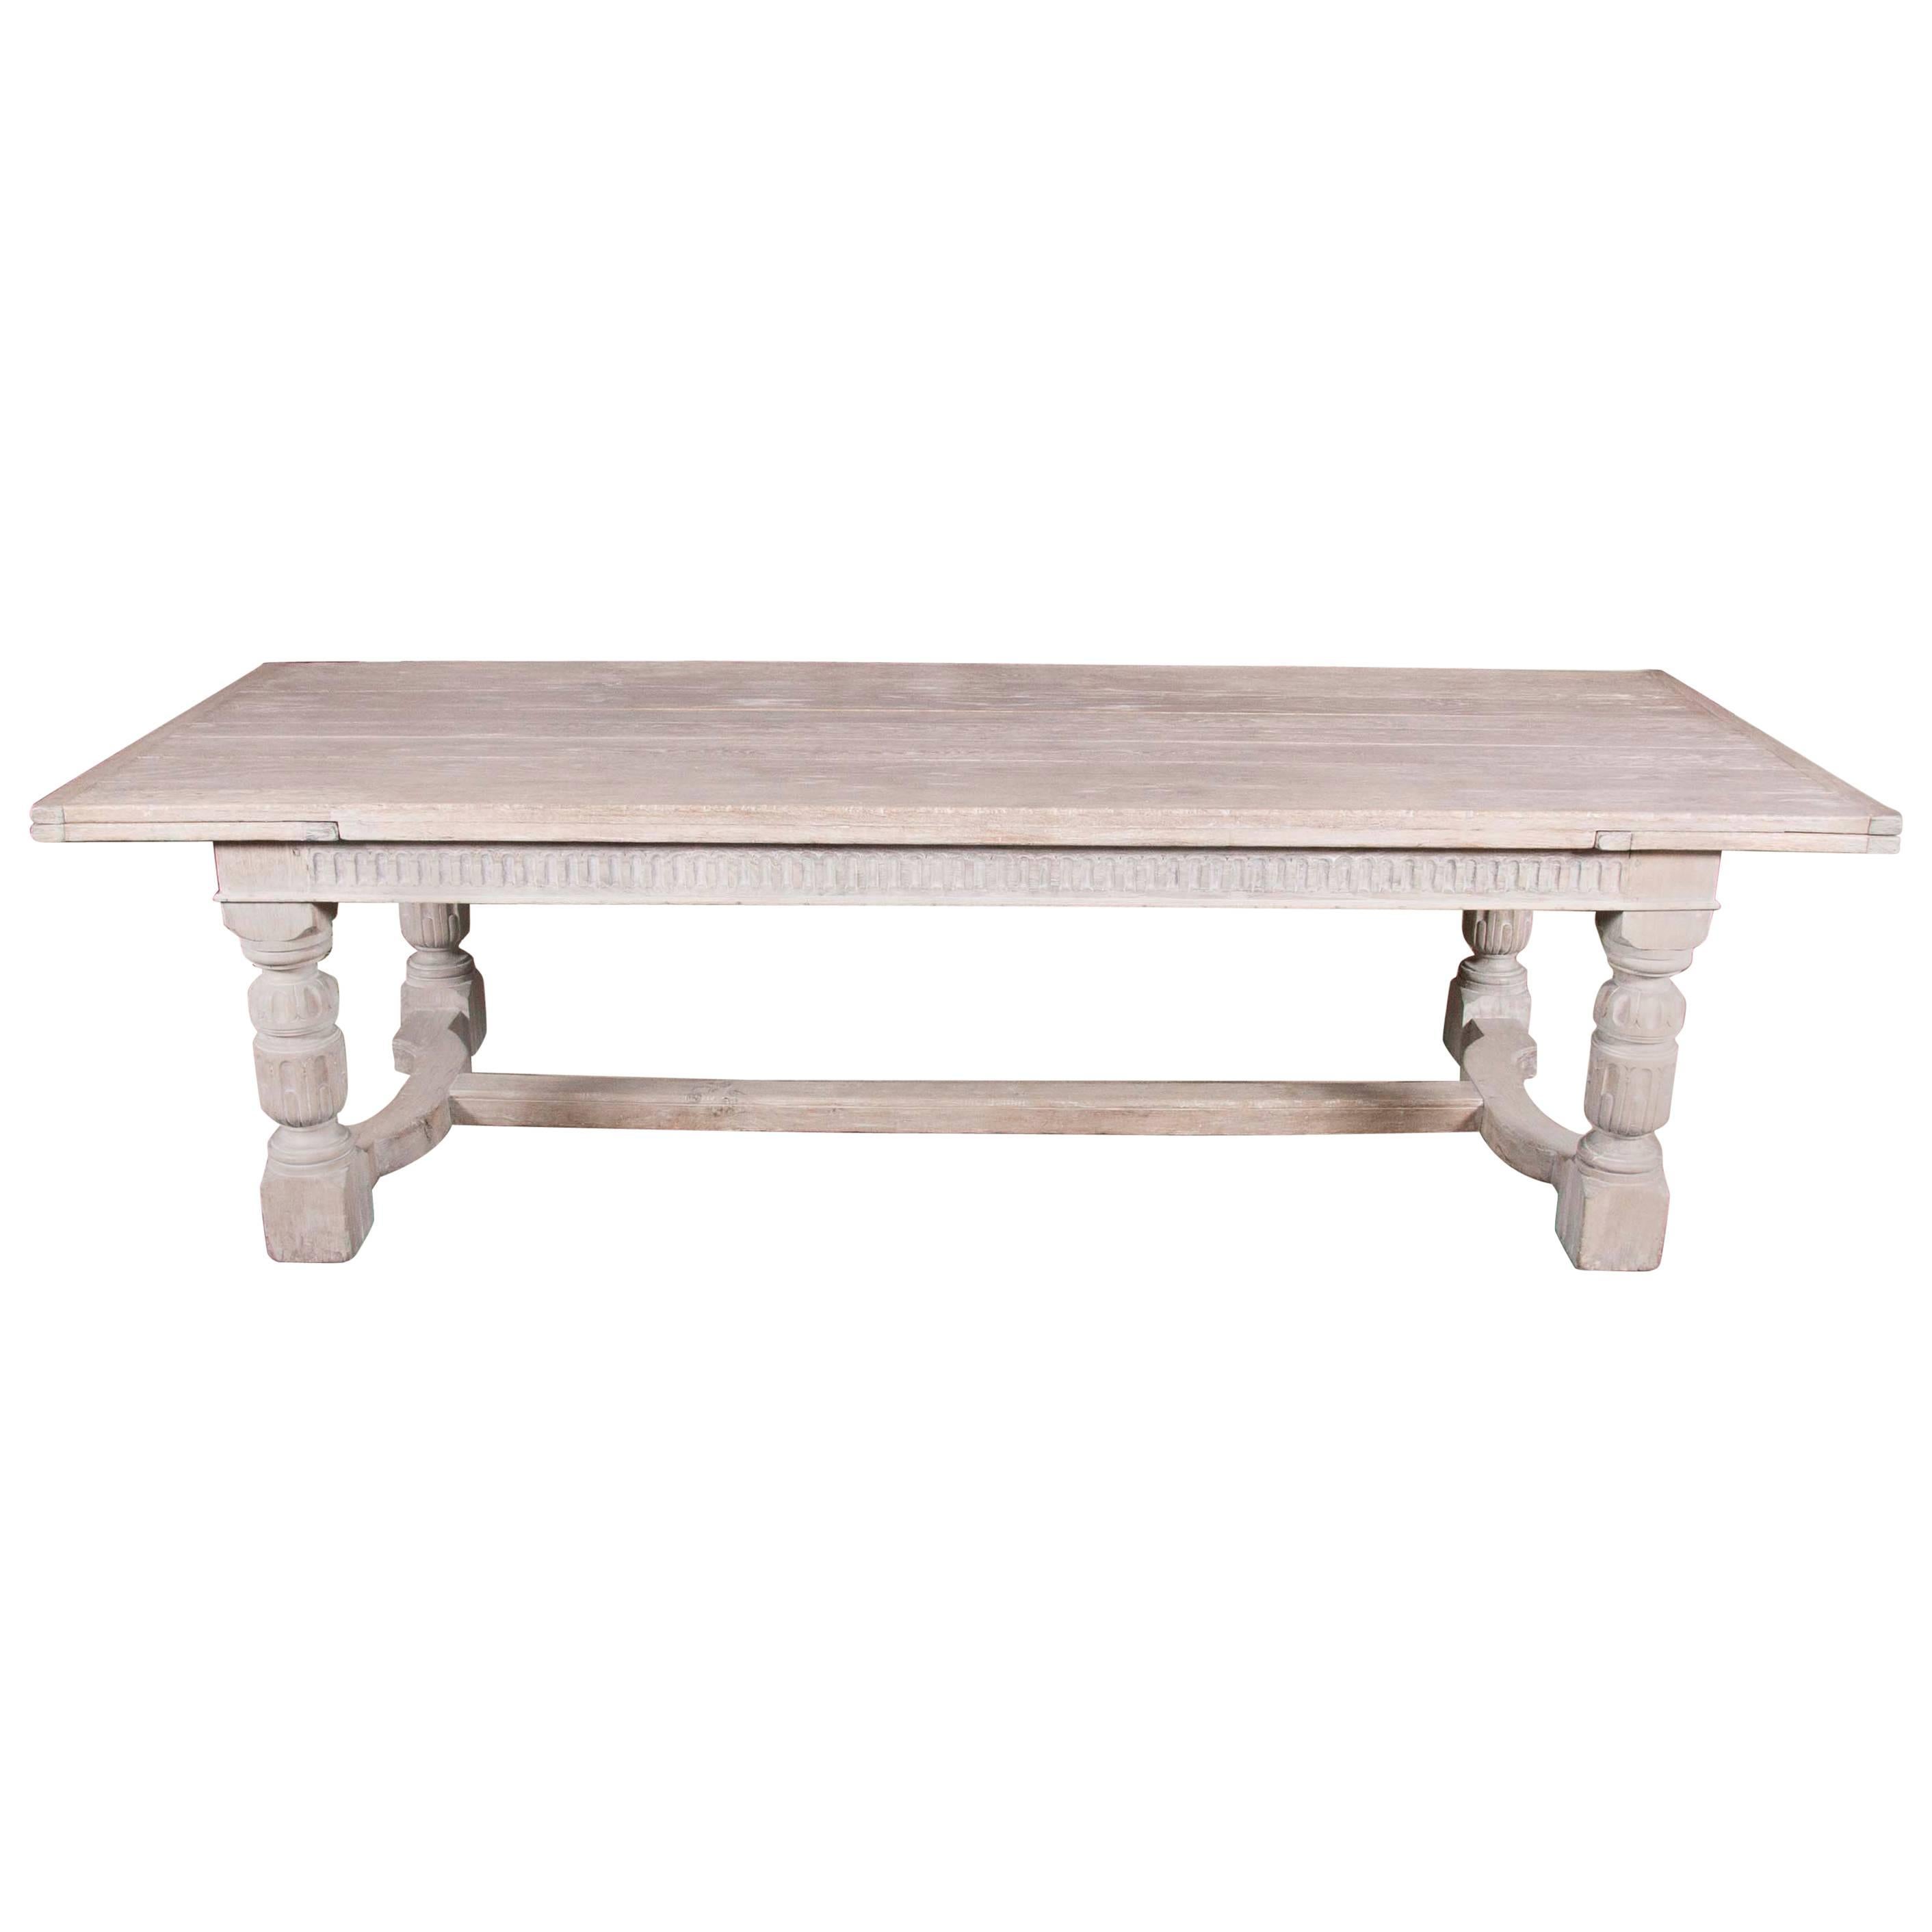 Large Limed Oak Refectory Table